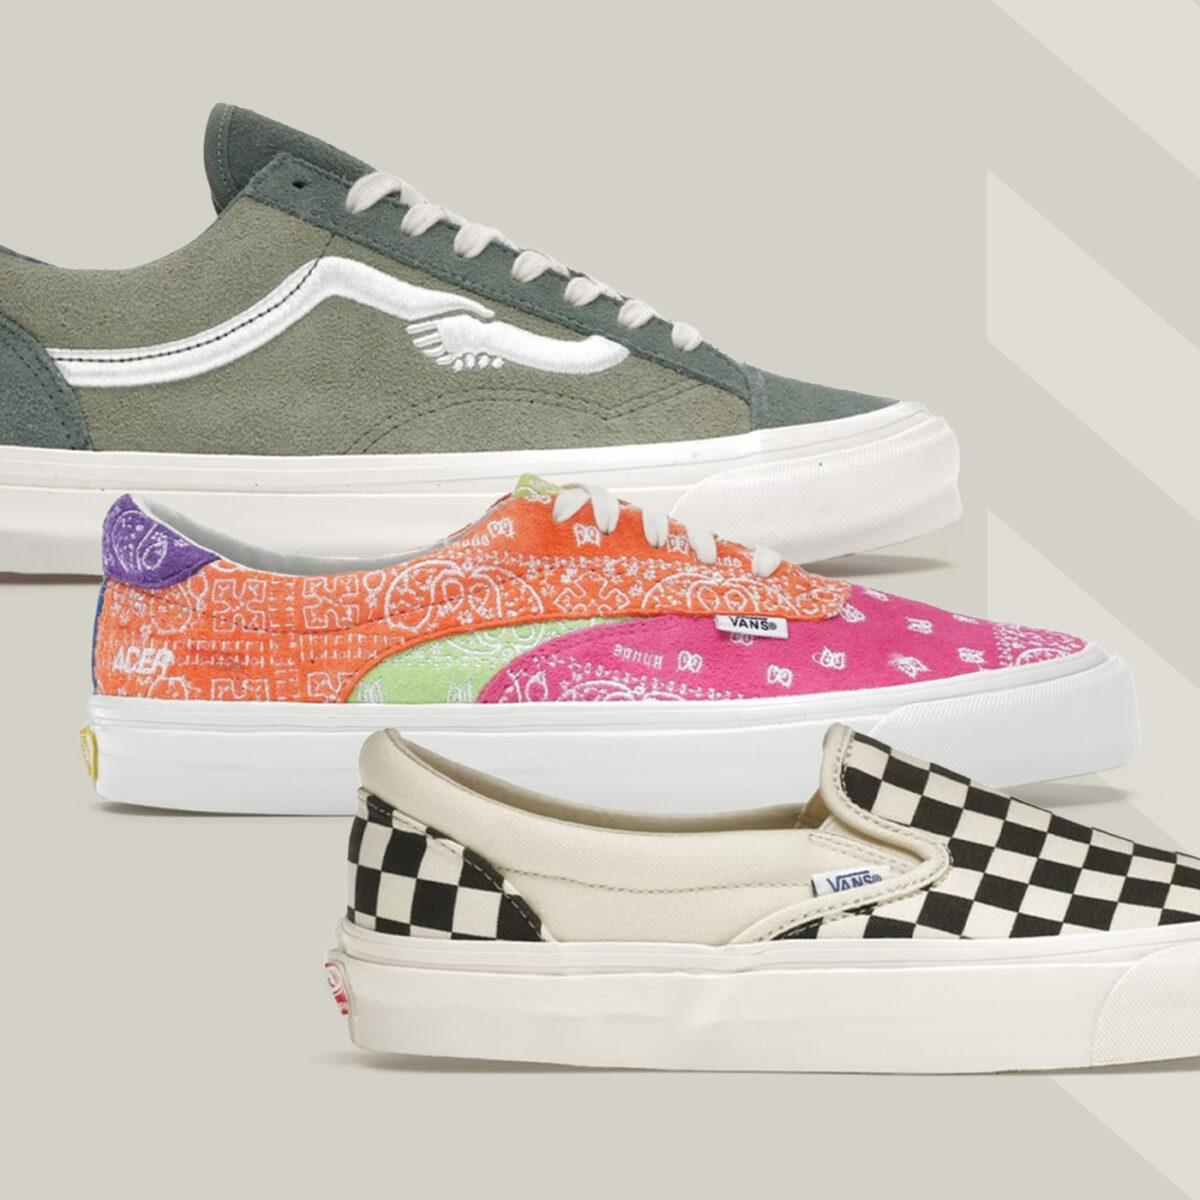 Supreme x Vans team-up to create this year's must-have skate shoe